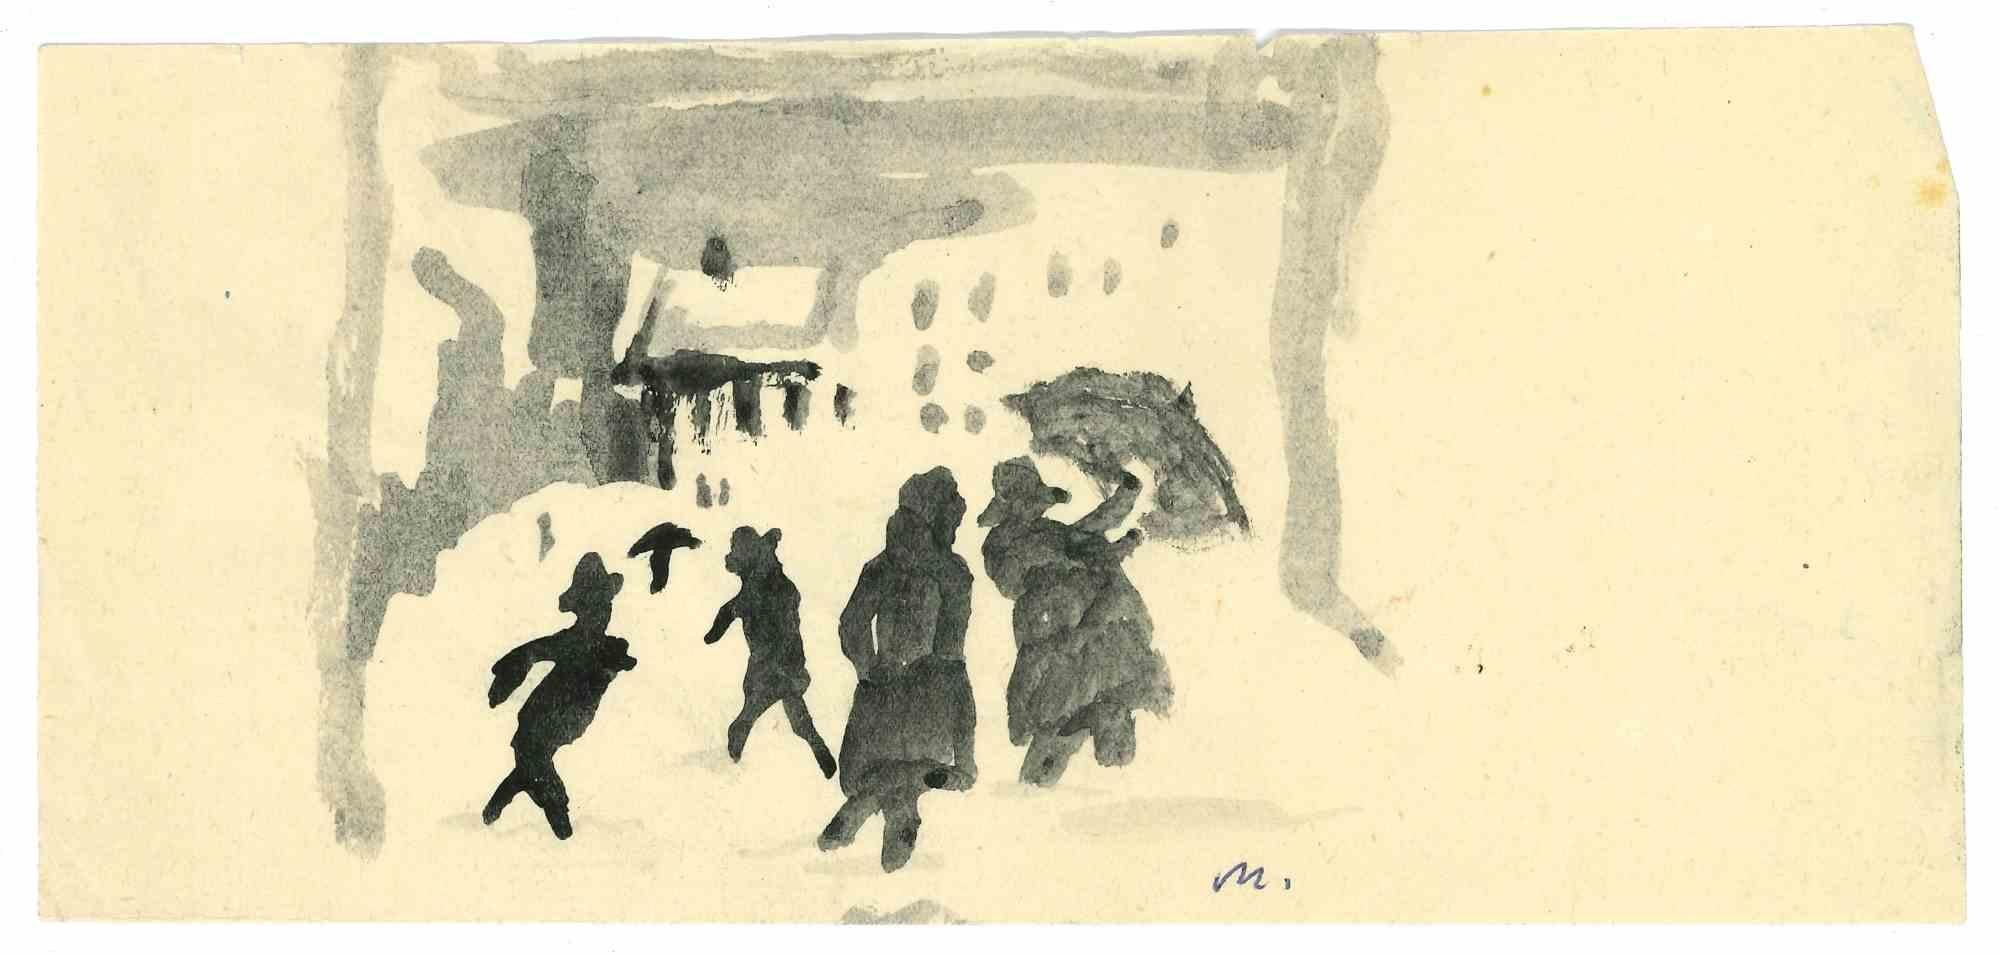 Walking is a watercolor realized by Mino Maccari  (1924-1989) in the Mid-20th Century.

Hand-signed.

Good conditions with slight foxing.

Mino Maccari (Siena, 1924-Rome, June 16, 1989) was an Italian writer, painter, engraver and journalist, winner